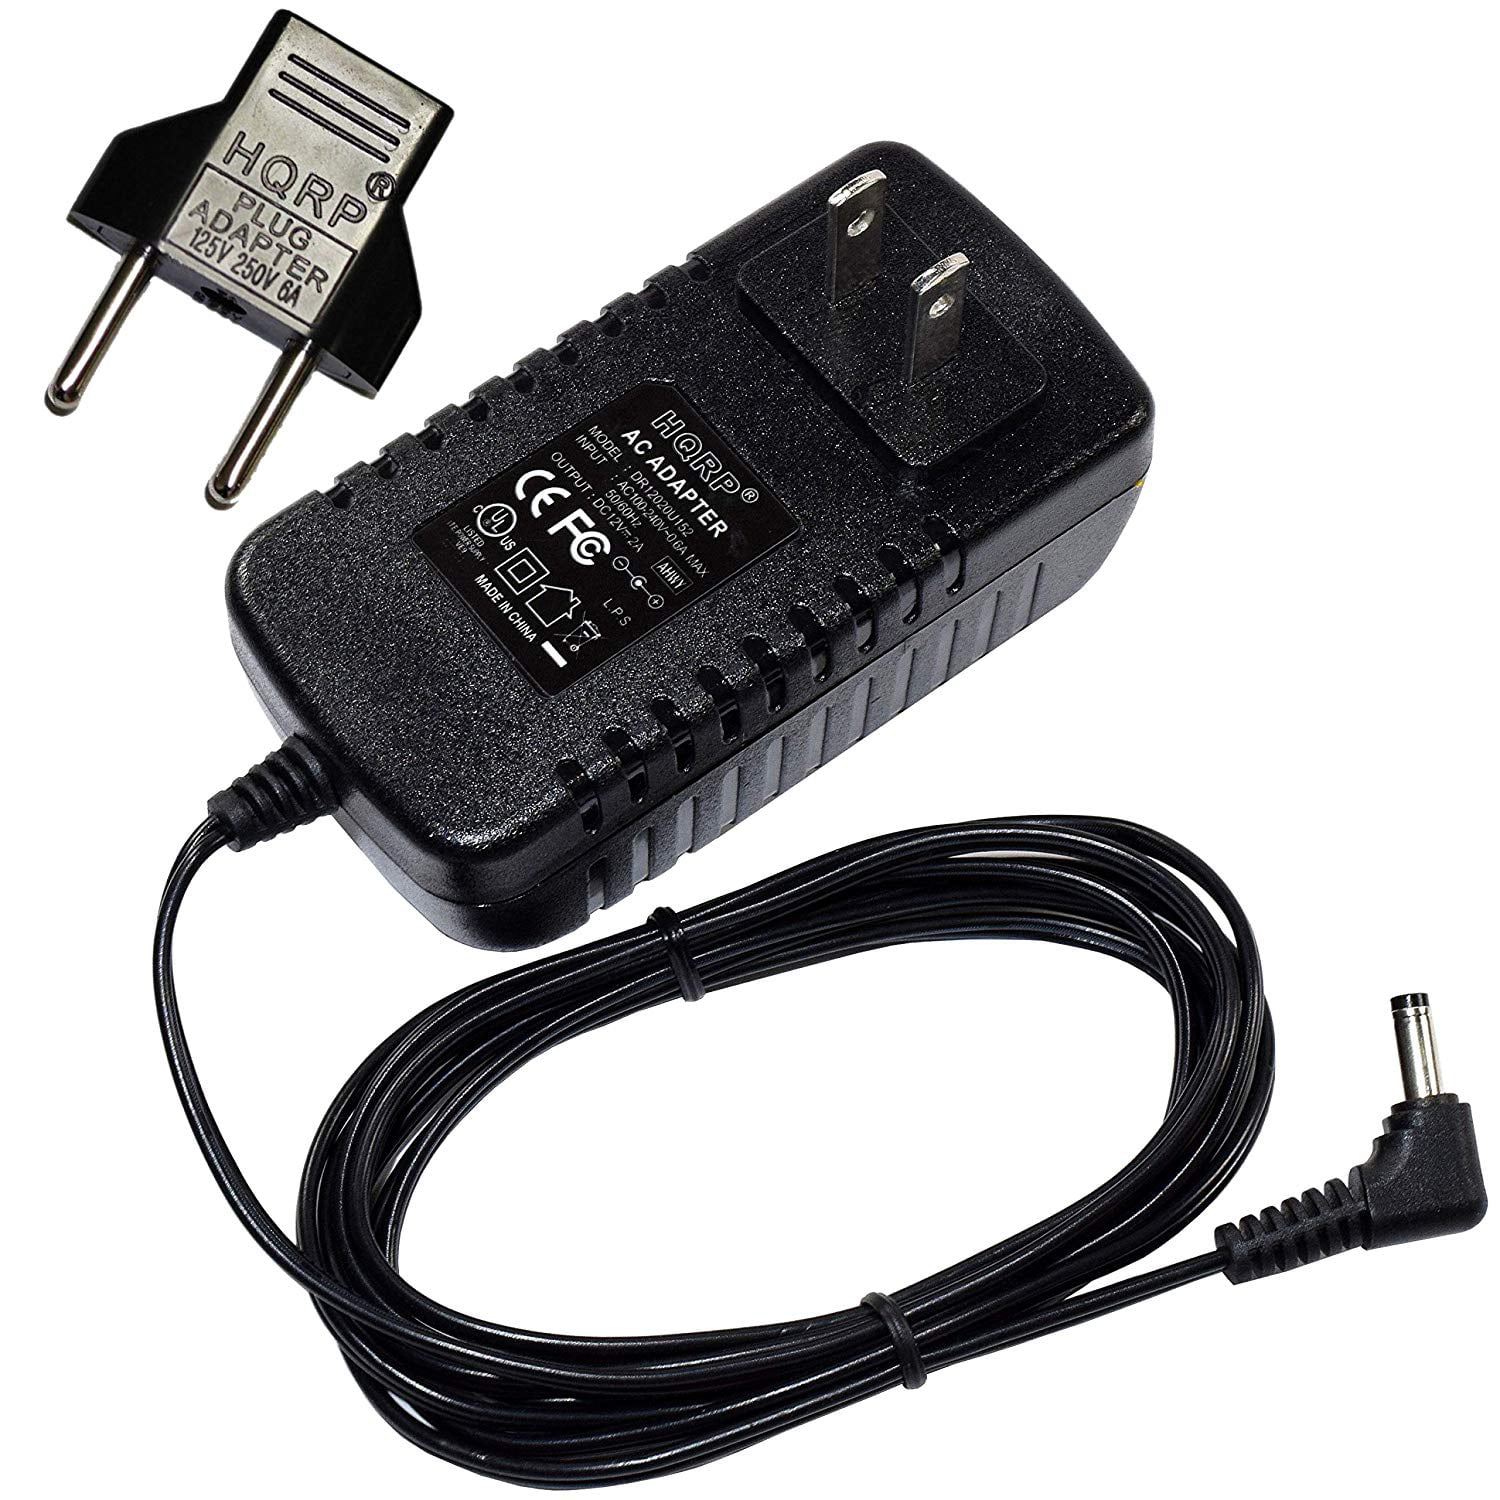 HQRP 12V Adapter for Logitech Pure Fi Express Plus S-00067 EFS01301000130CE Docking Station Power Supply Cord Adaptor Charger + Plug Adapter - Walmart.com